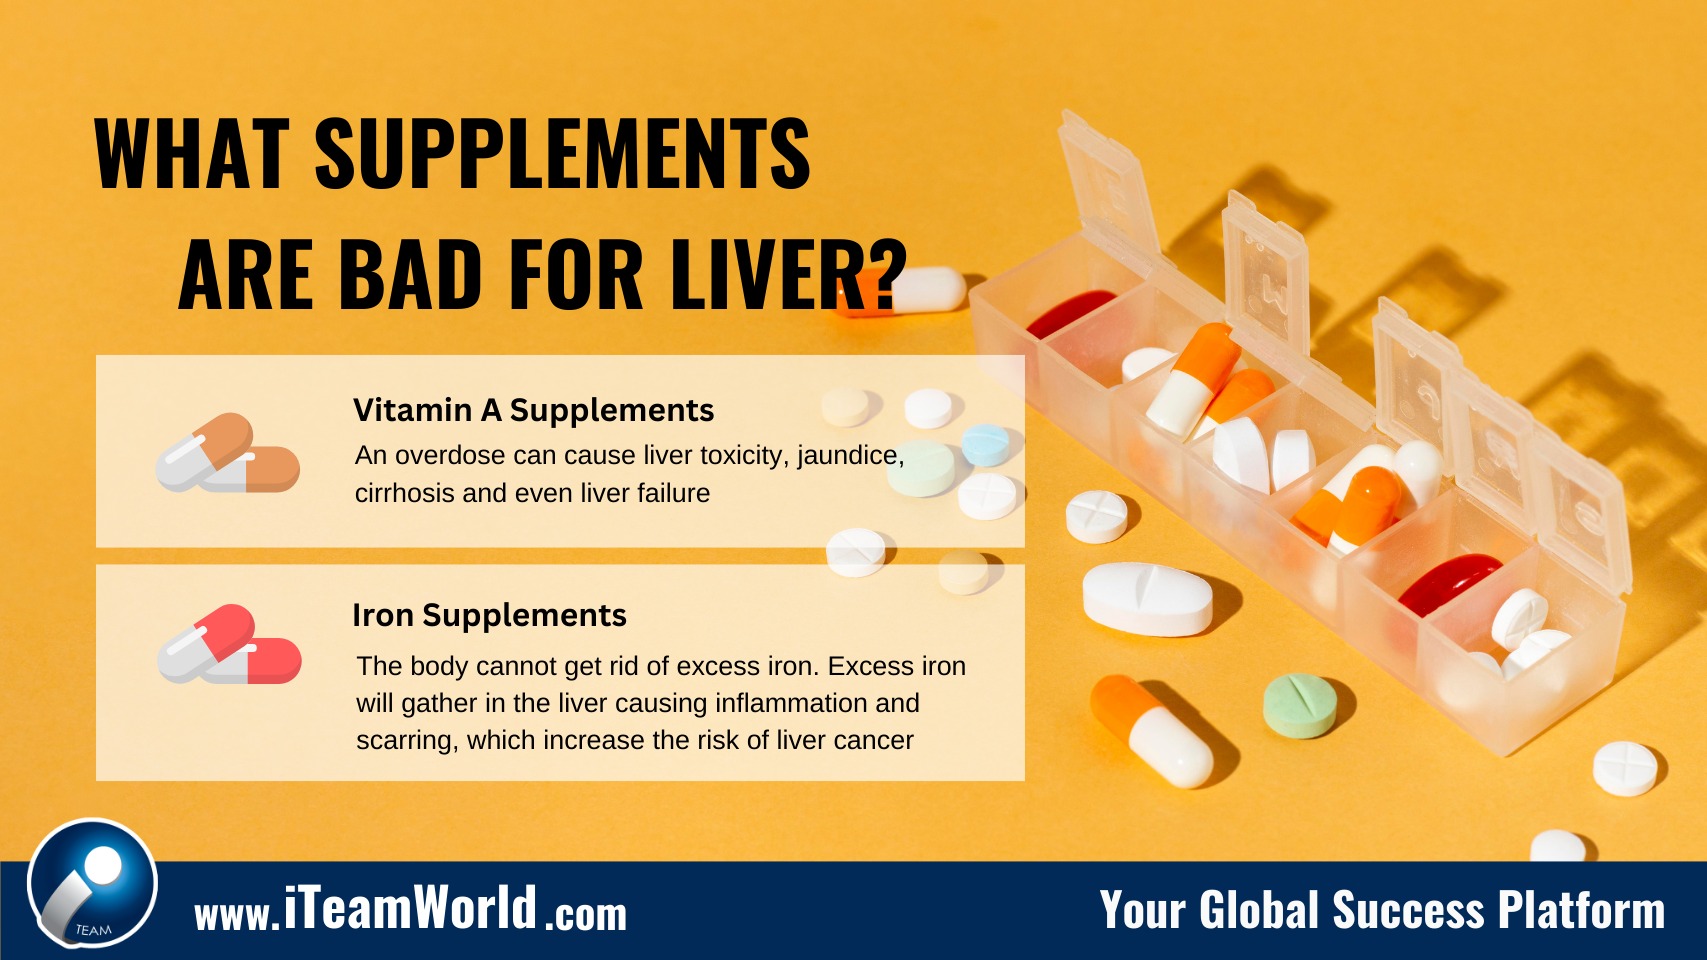 What supplements are bad for liver?